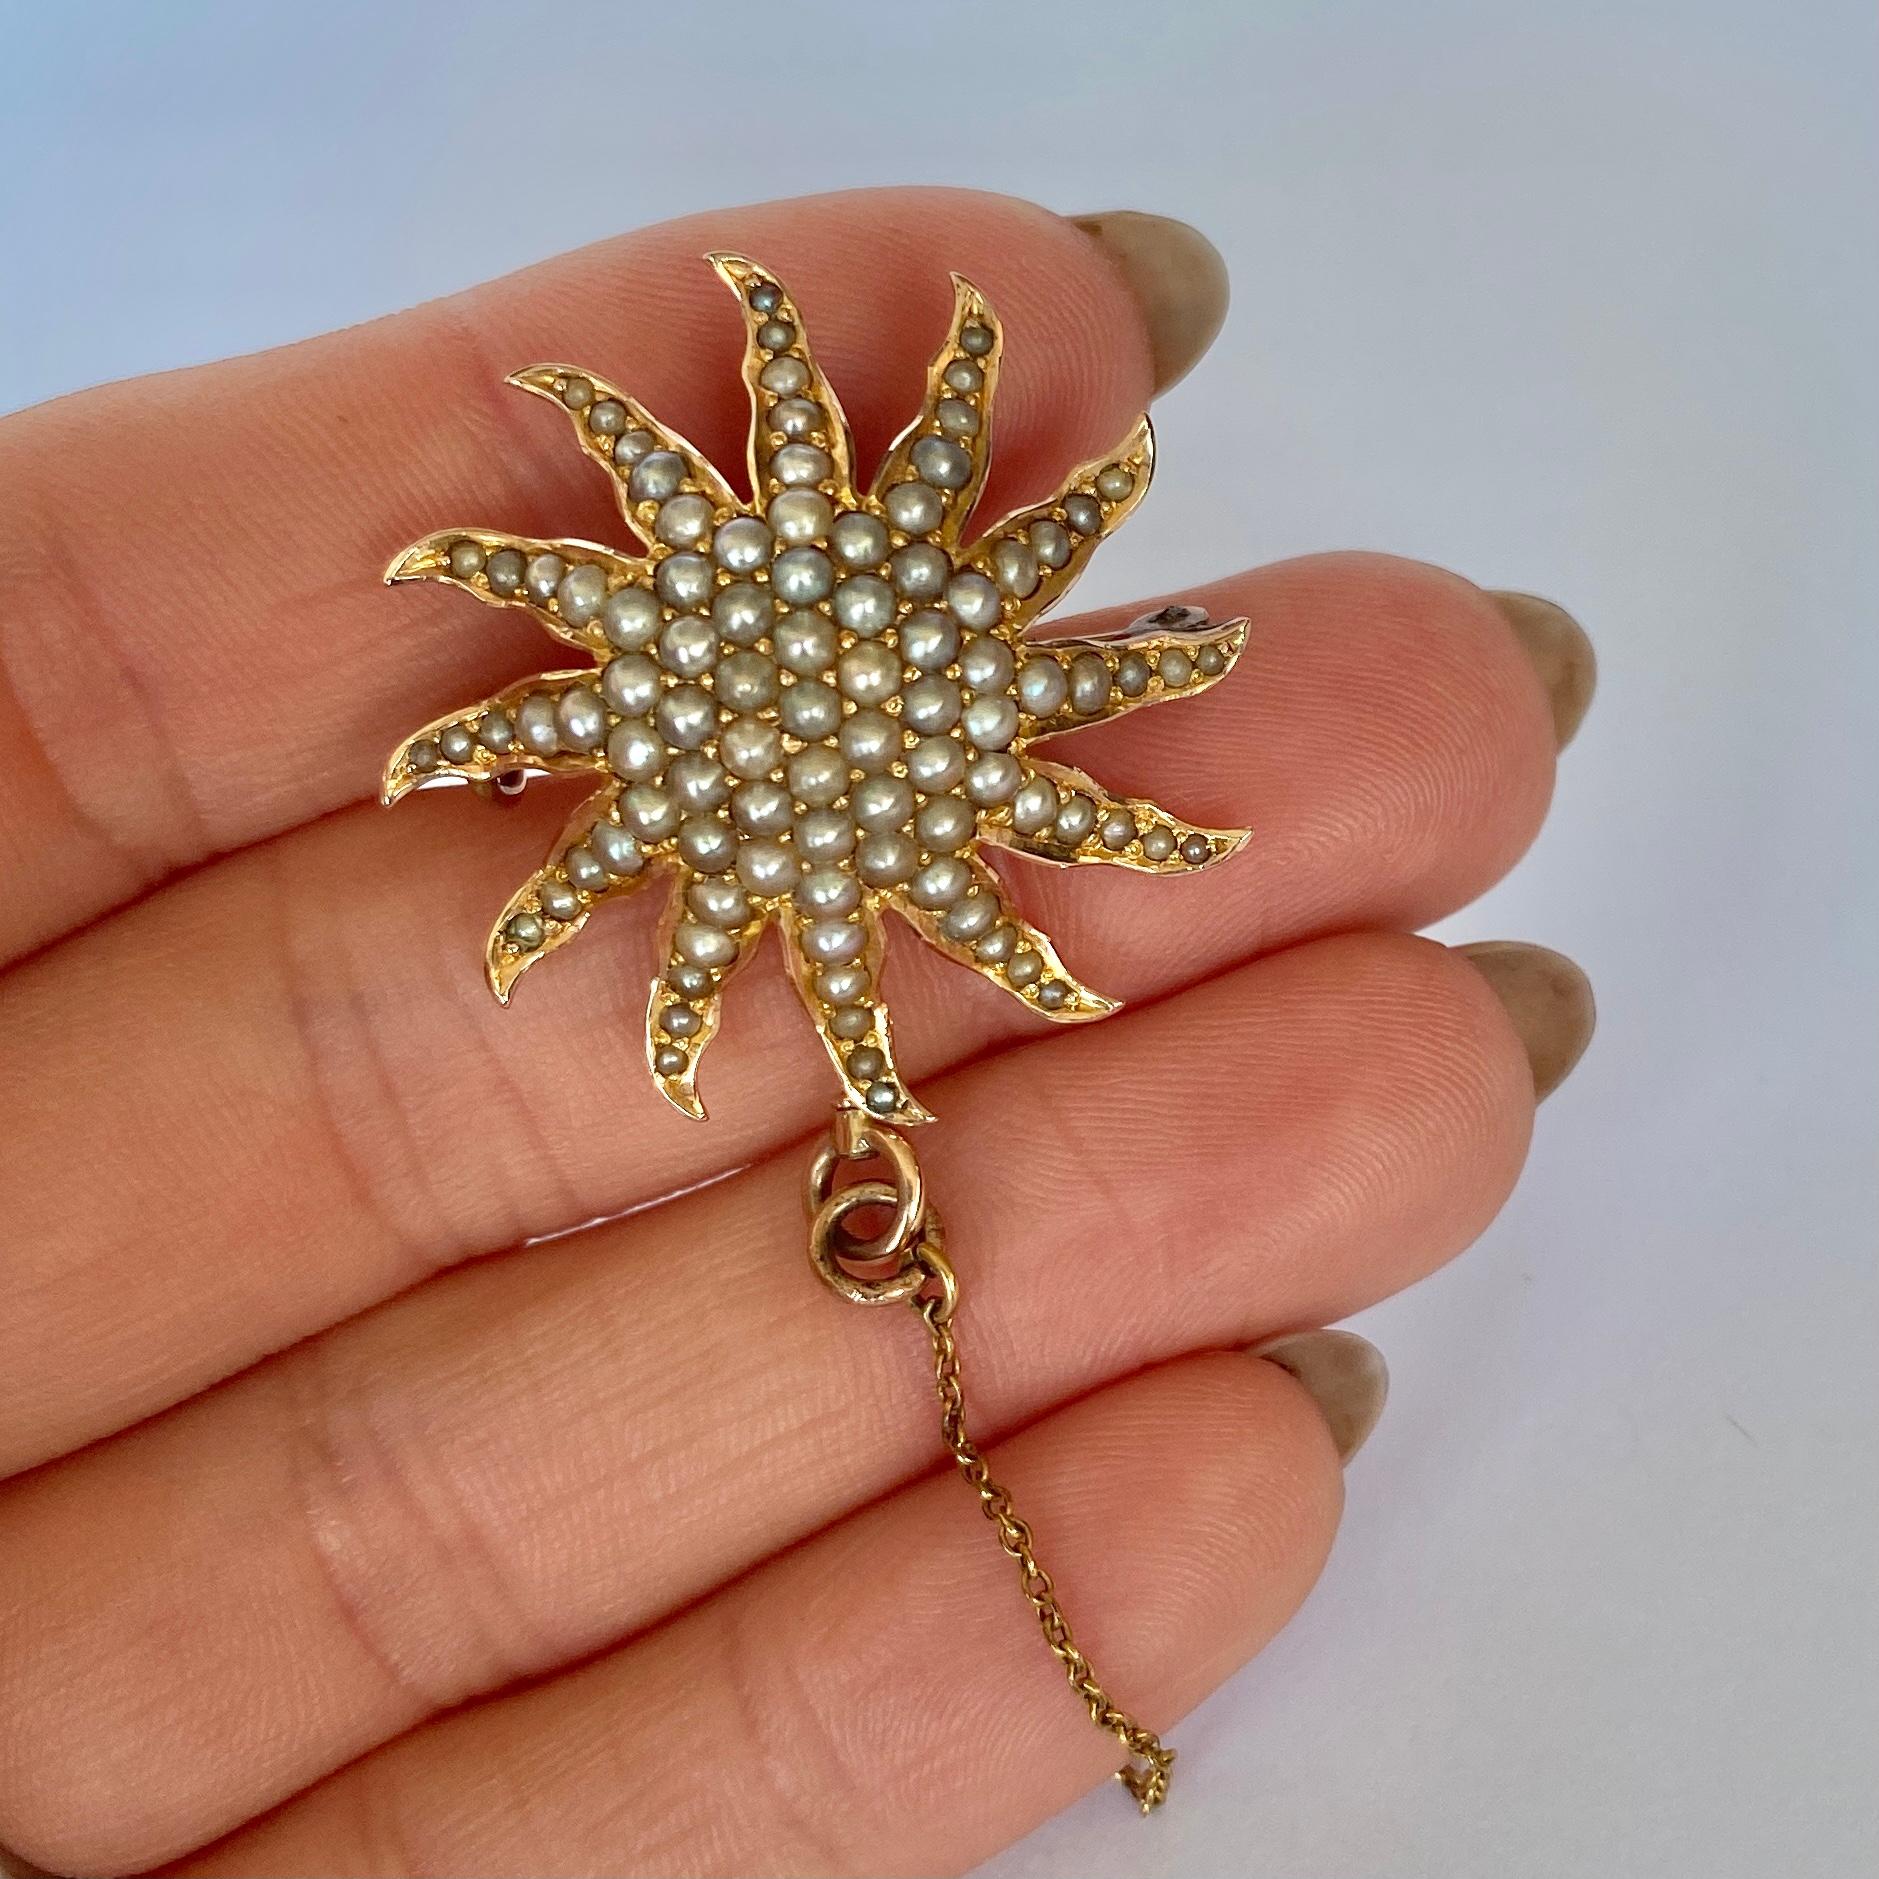 This stunning sun is adorned with pearls which are complimented perfectly by the bright yellow 15ct gold. On the back there is a pin which is very secure and a fold away loop to make this perfect for hanging off a chain!

Star Diameter: 30mm